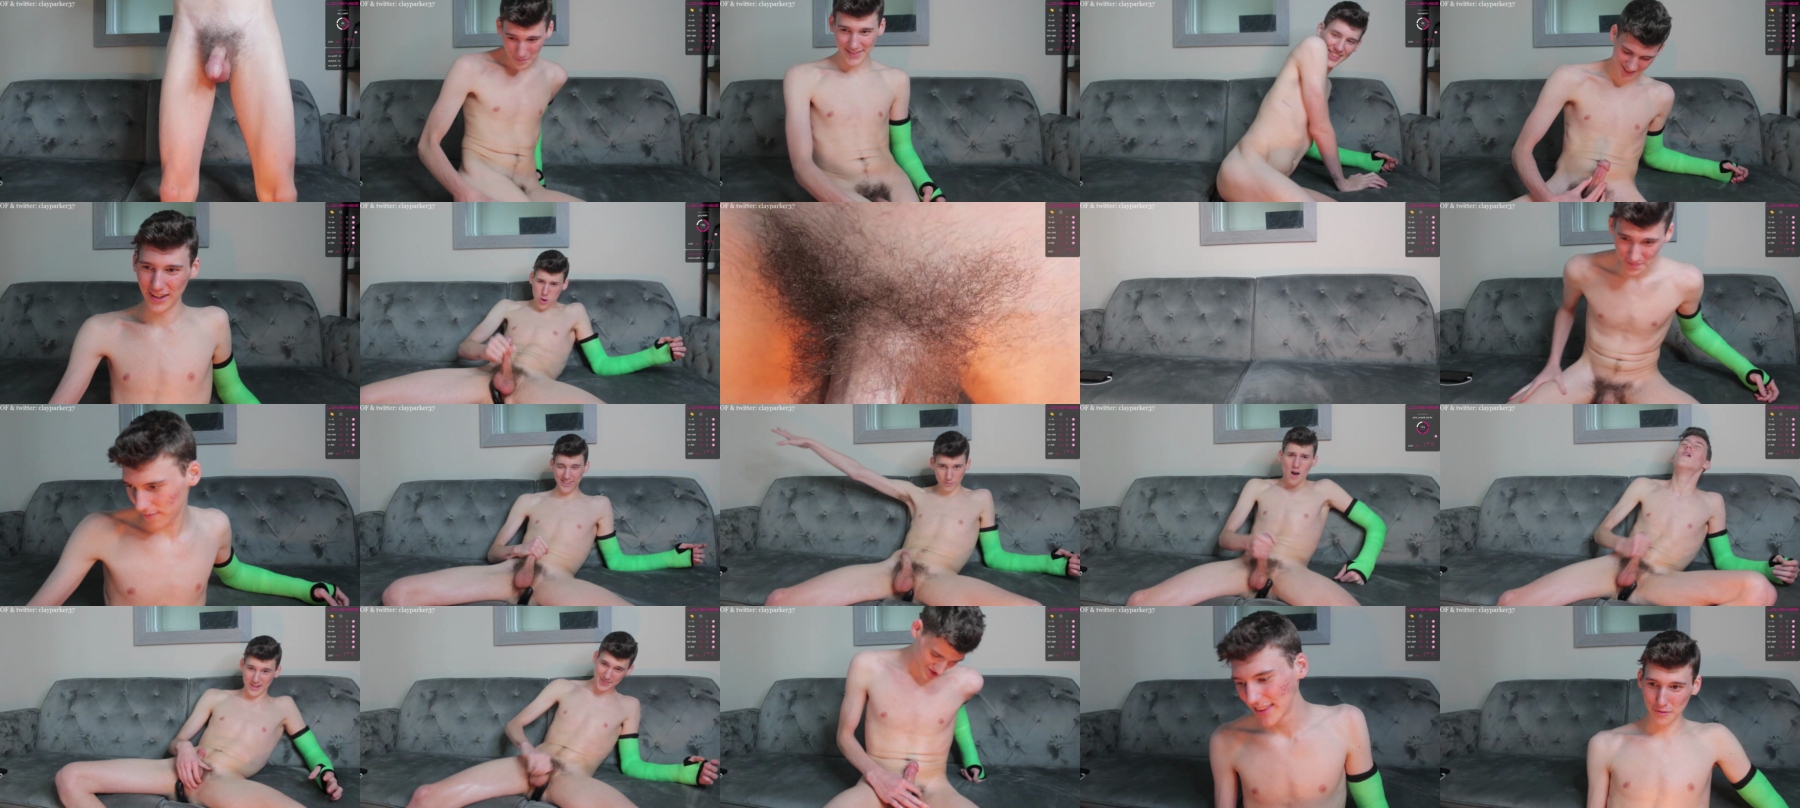 Clay_Parker  14-08-2021 Male Porn